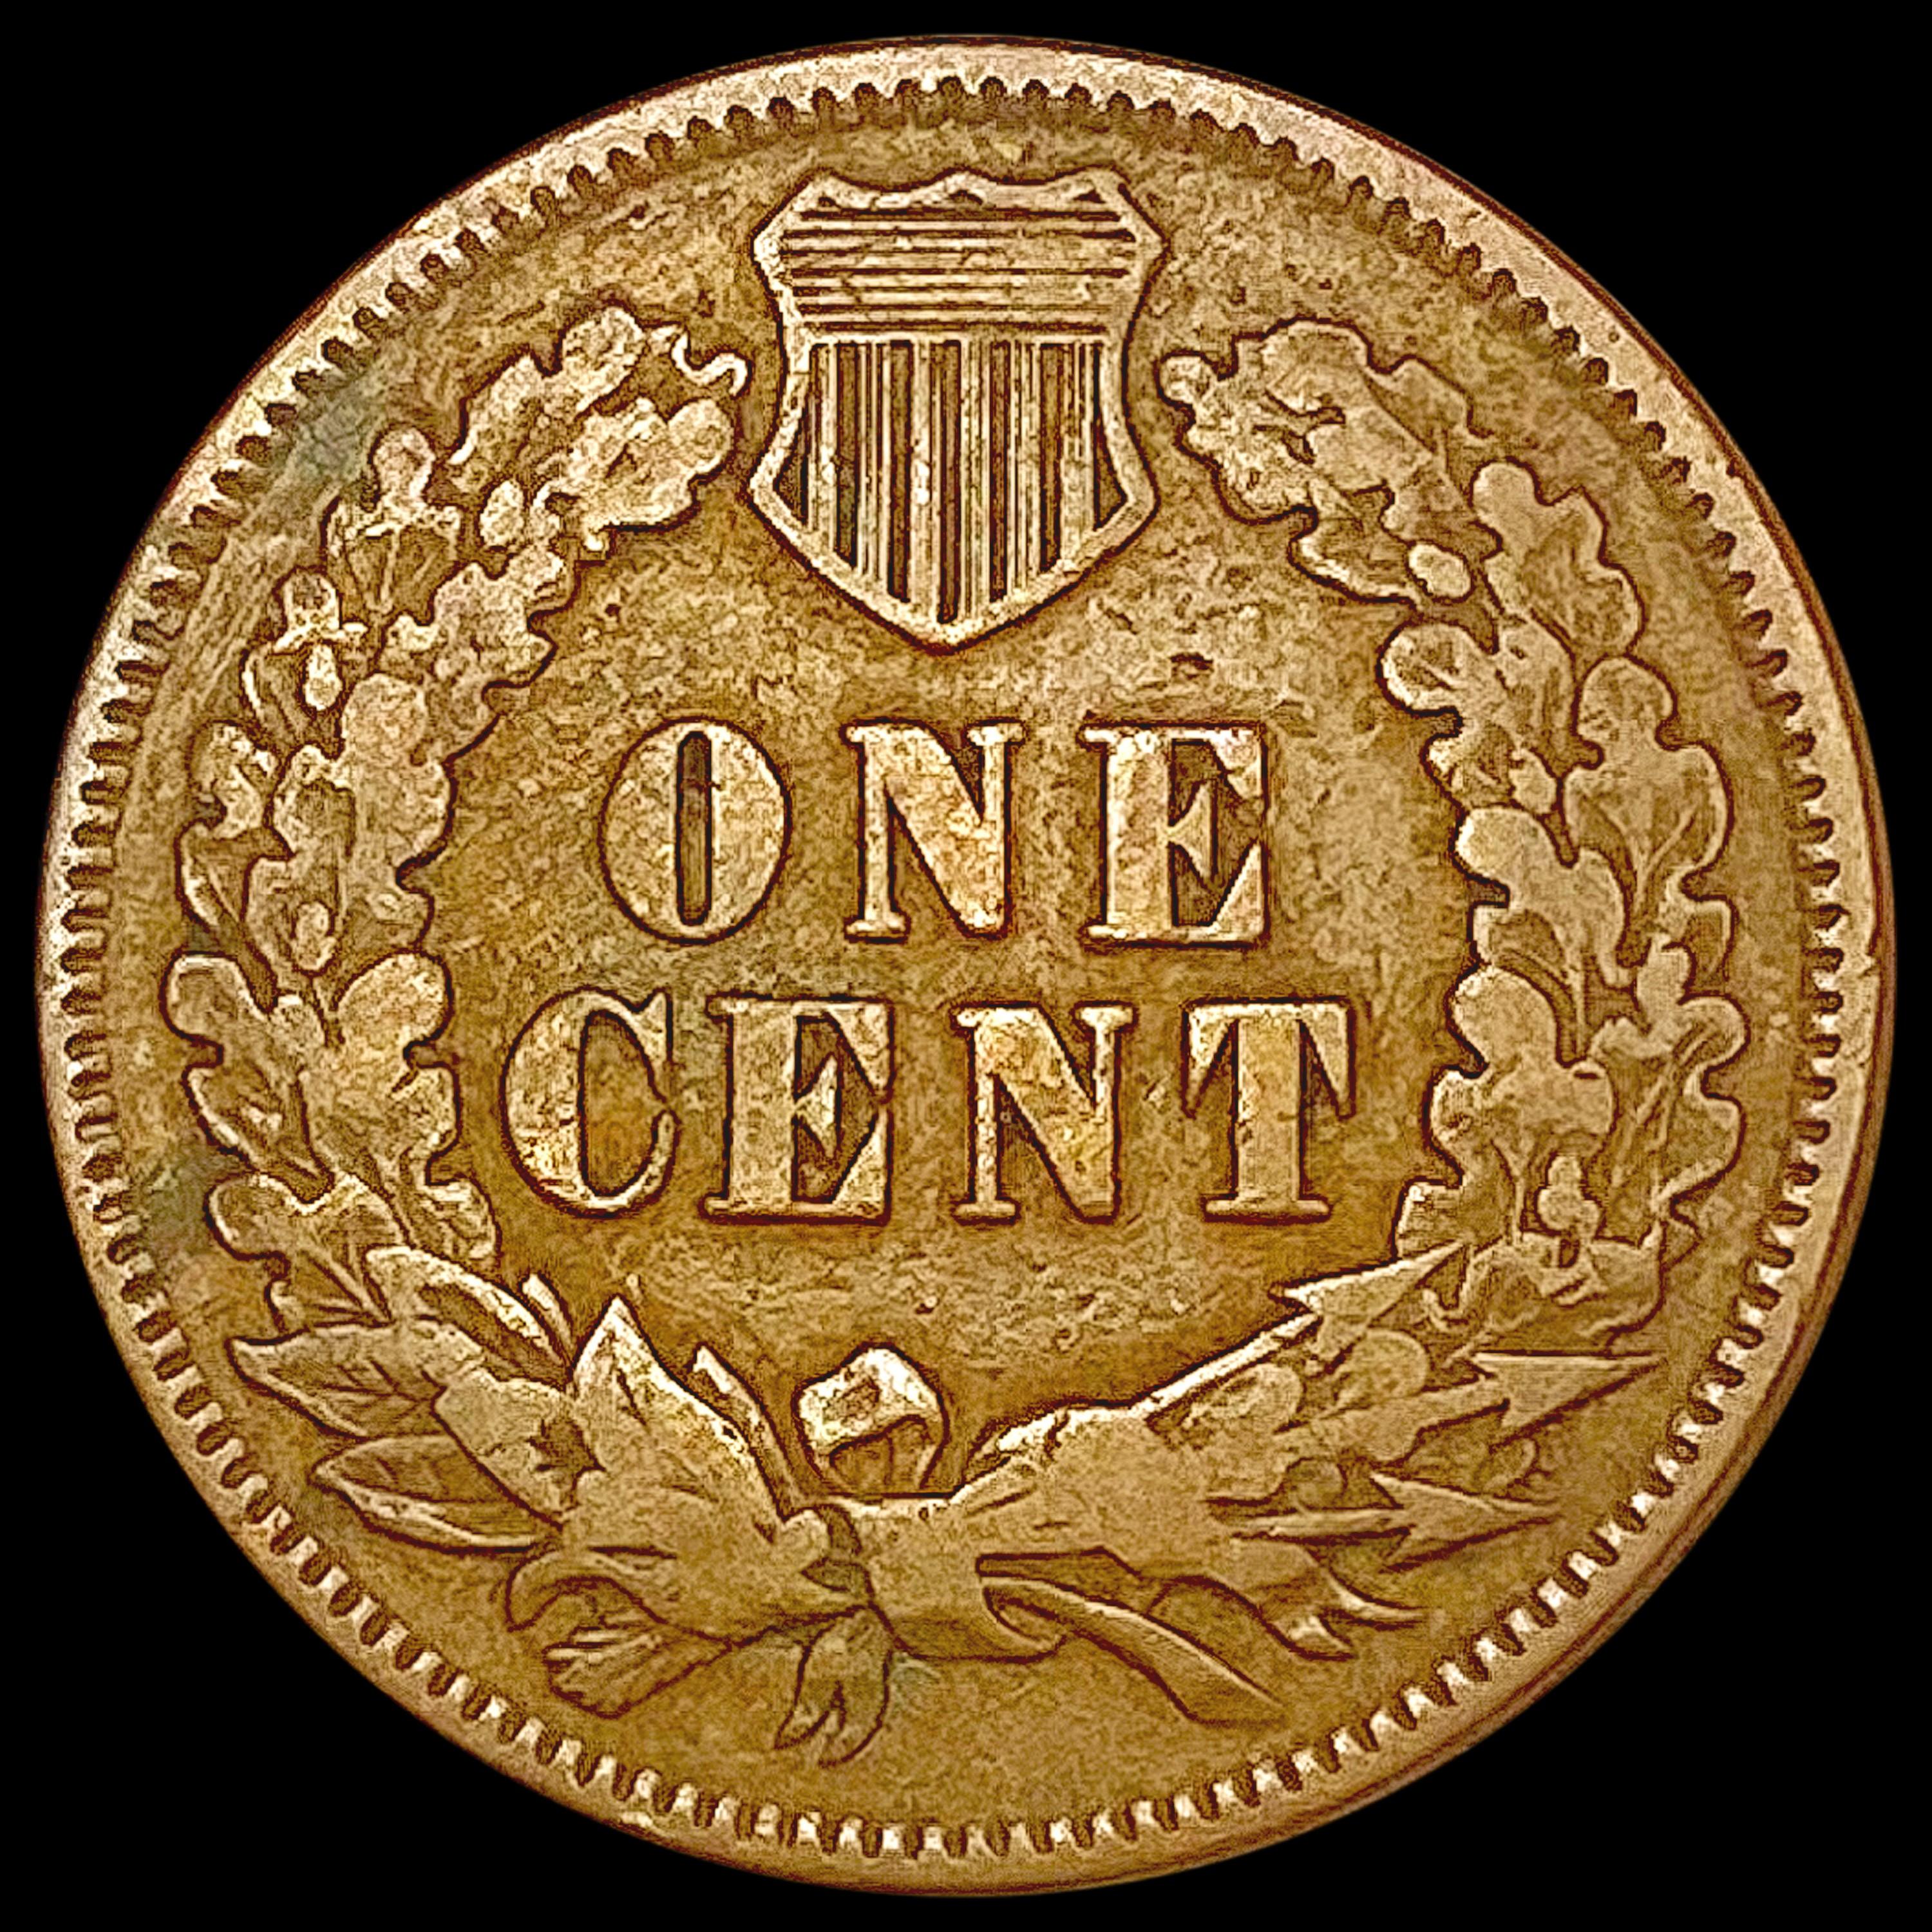 1873 Open 3 Indian Head Cent LIGHTLY CIRCULATED